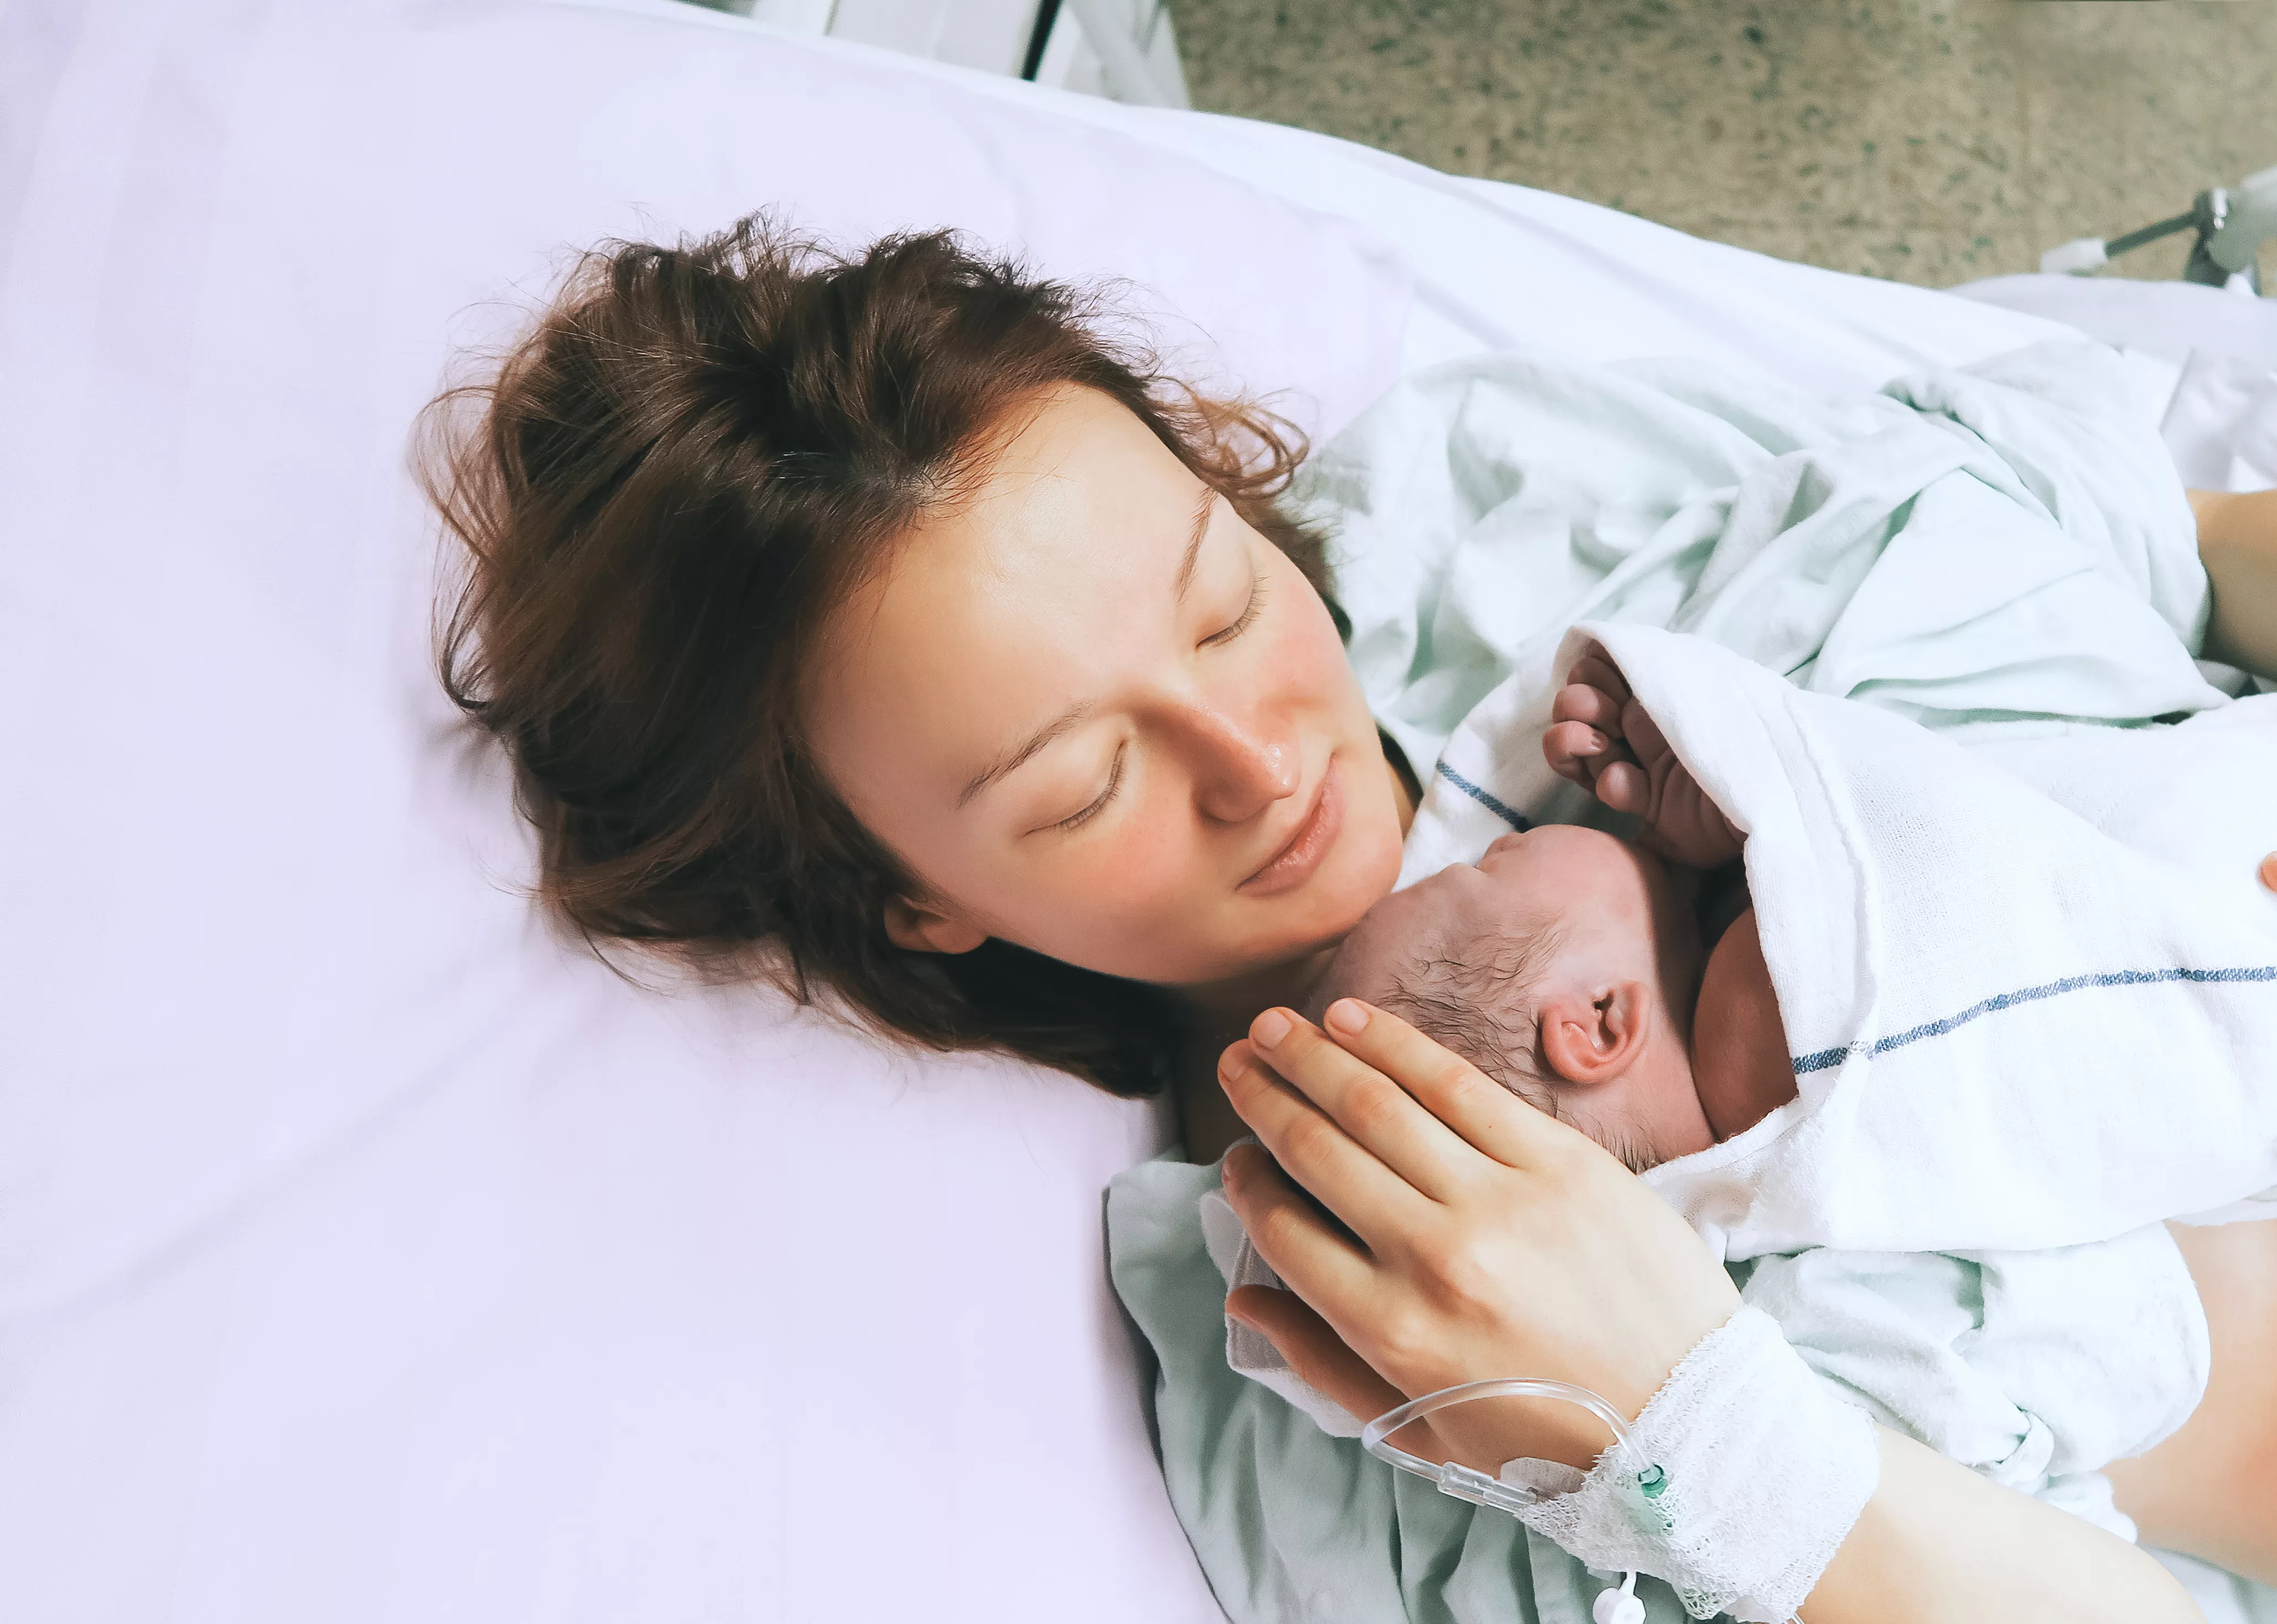 Mother and newborn rest together after labor